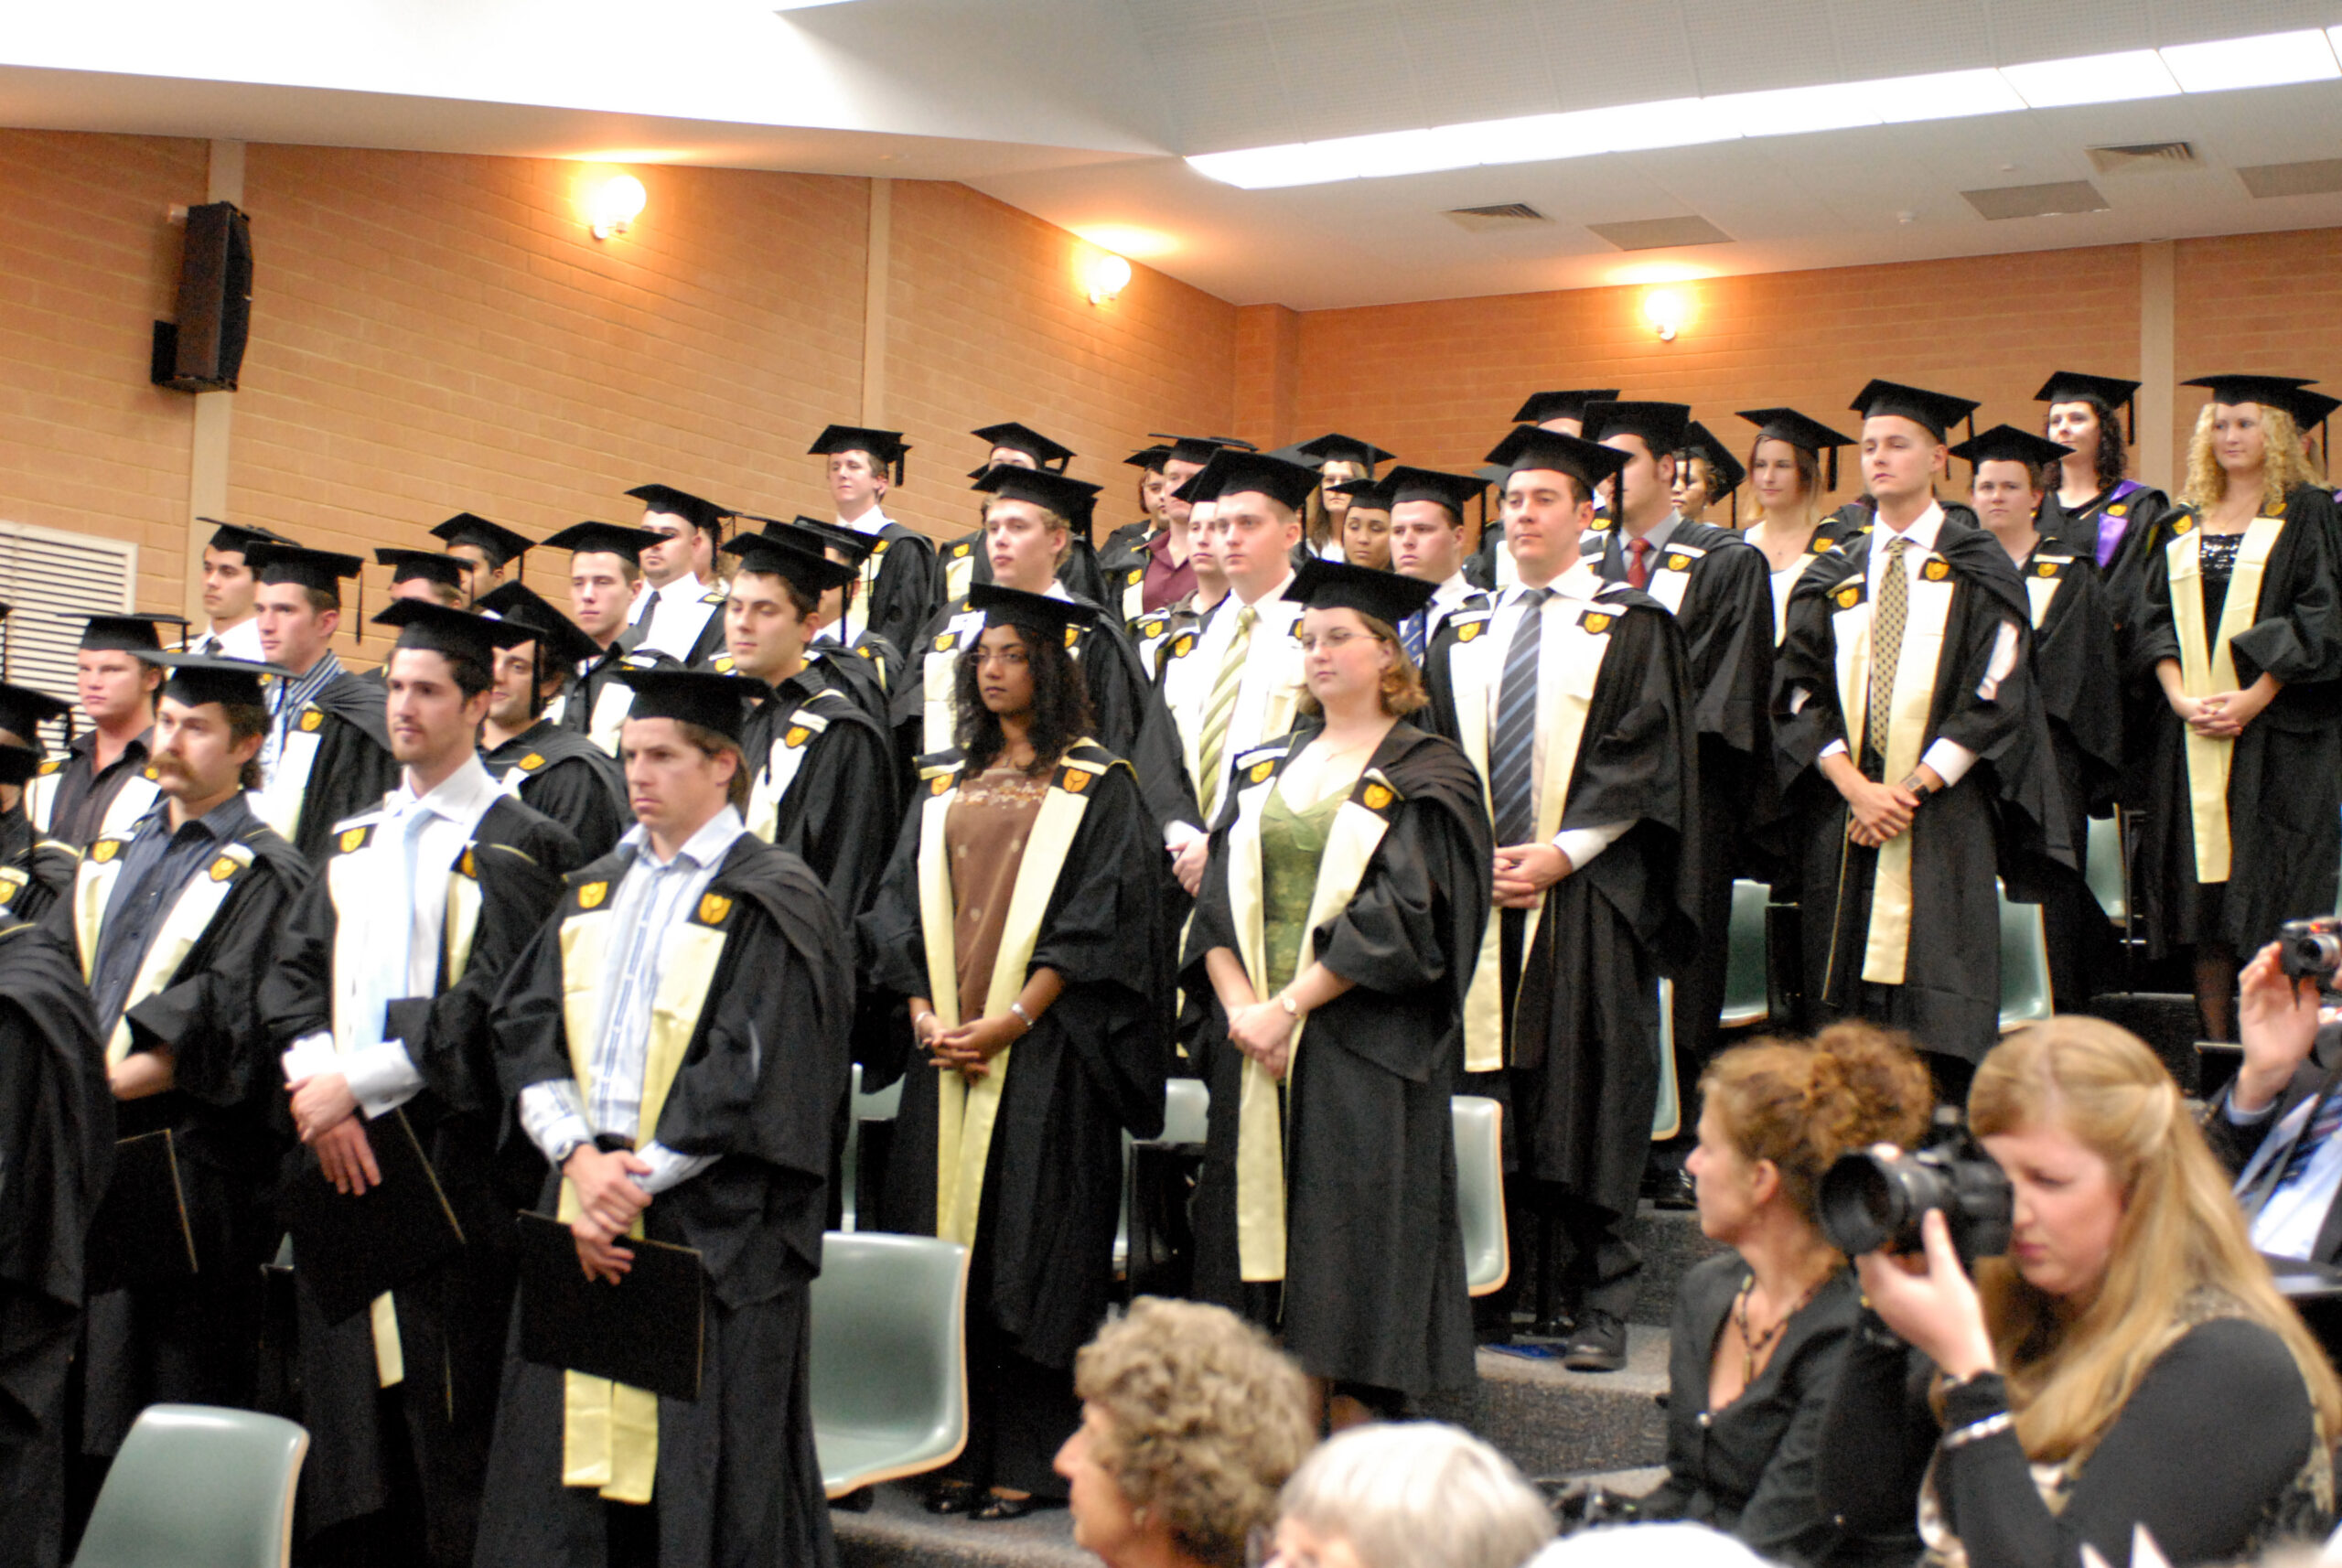 A lecture theatre full of students standing in black academic gowns and wearing gold sashes and mortarboards.